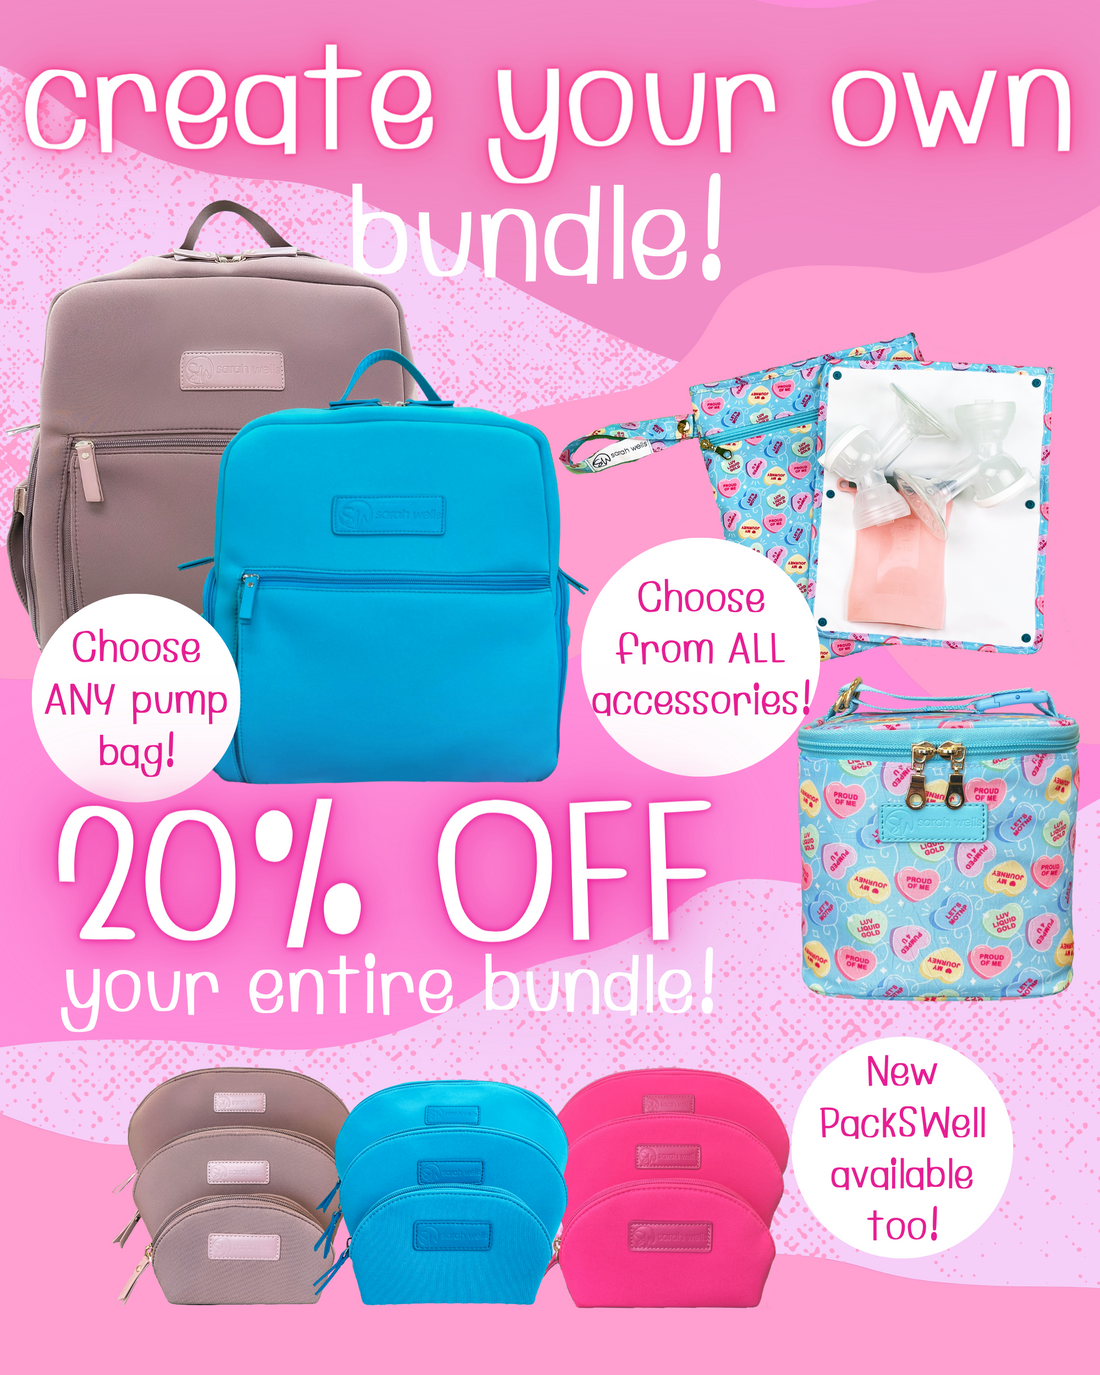 Create Your Own Bundle - 20% Off